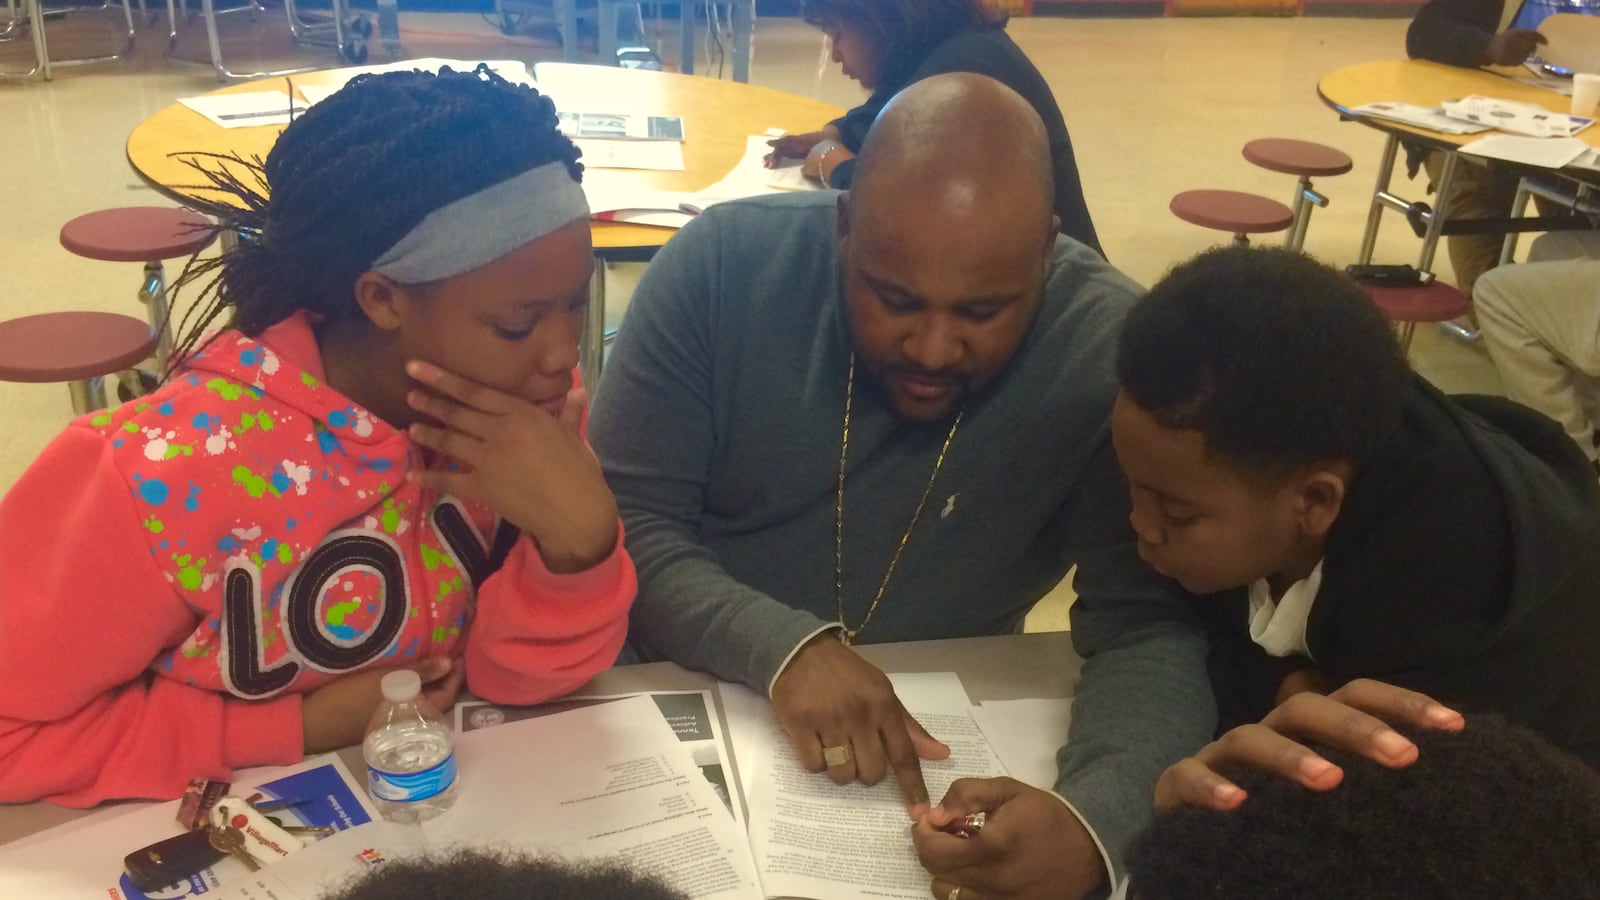 Shamaine Walls reviews TNReady practice questions with his niece Angelica Walls and nephew Mario Taylor at a TNReady information event sponsored in Memphis by the Tennessee Education Association.